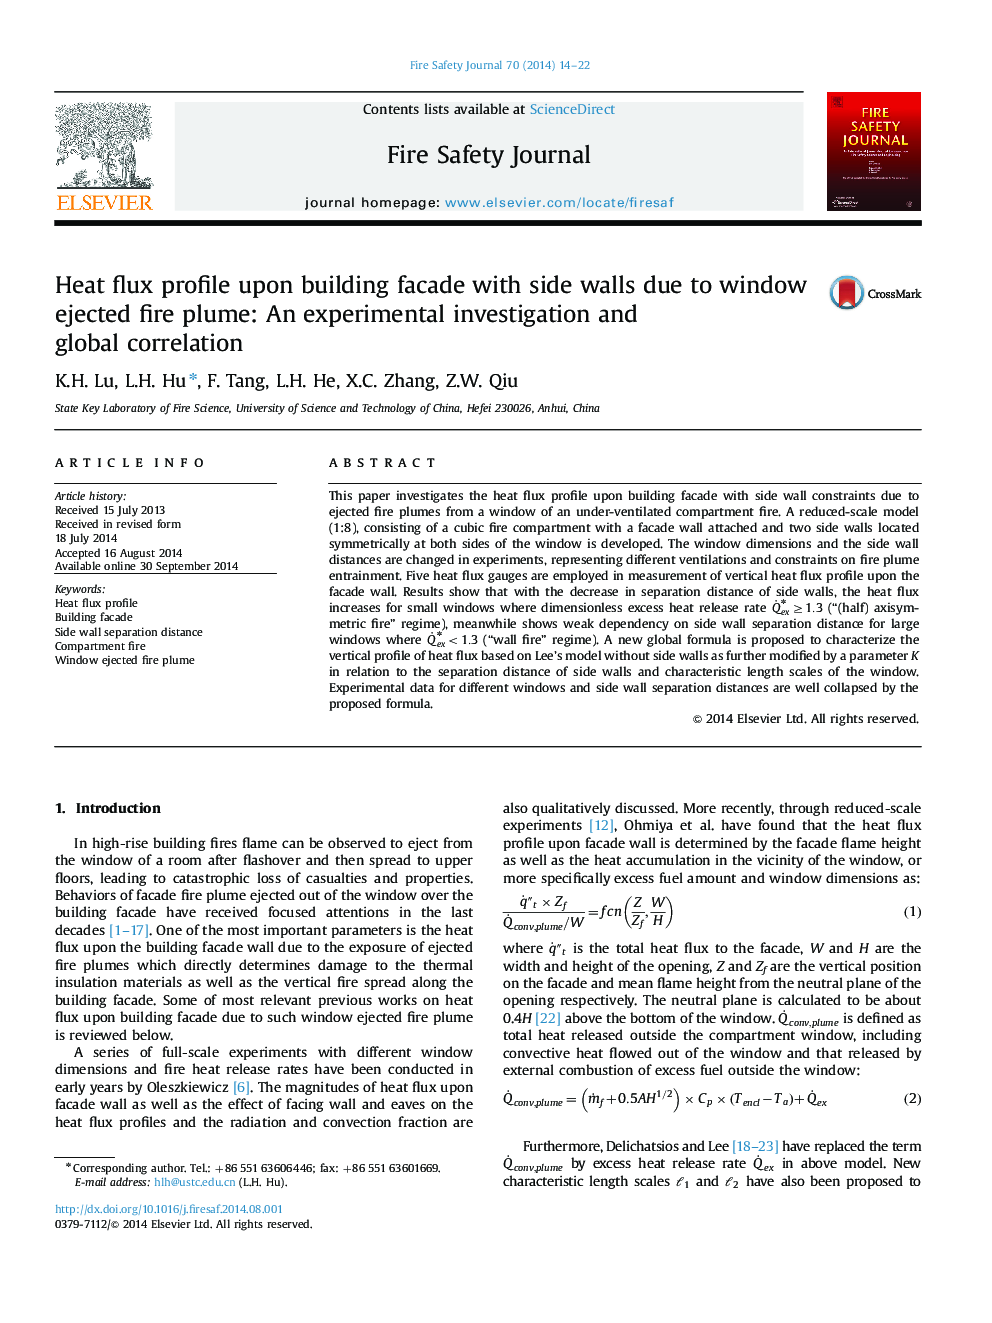 Heat flux profile upon building facade with side walls due to window ejected fire plume: An experimental investigation and global correlation